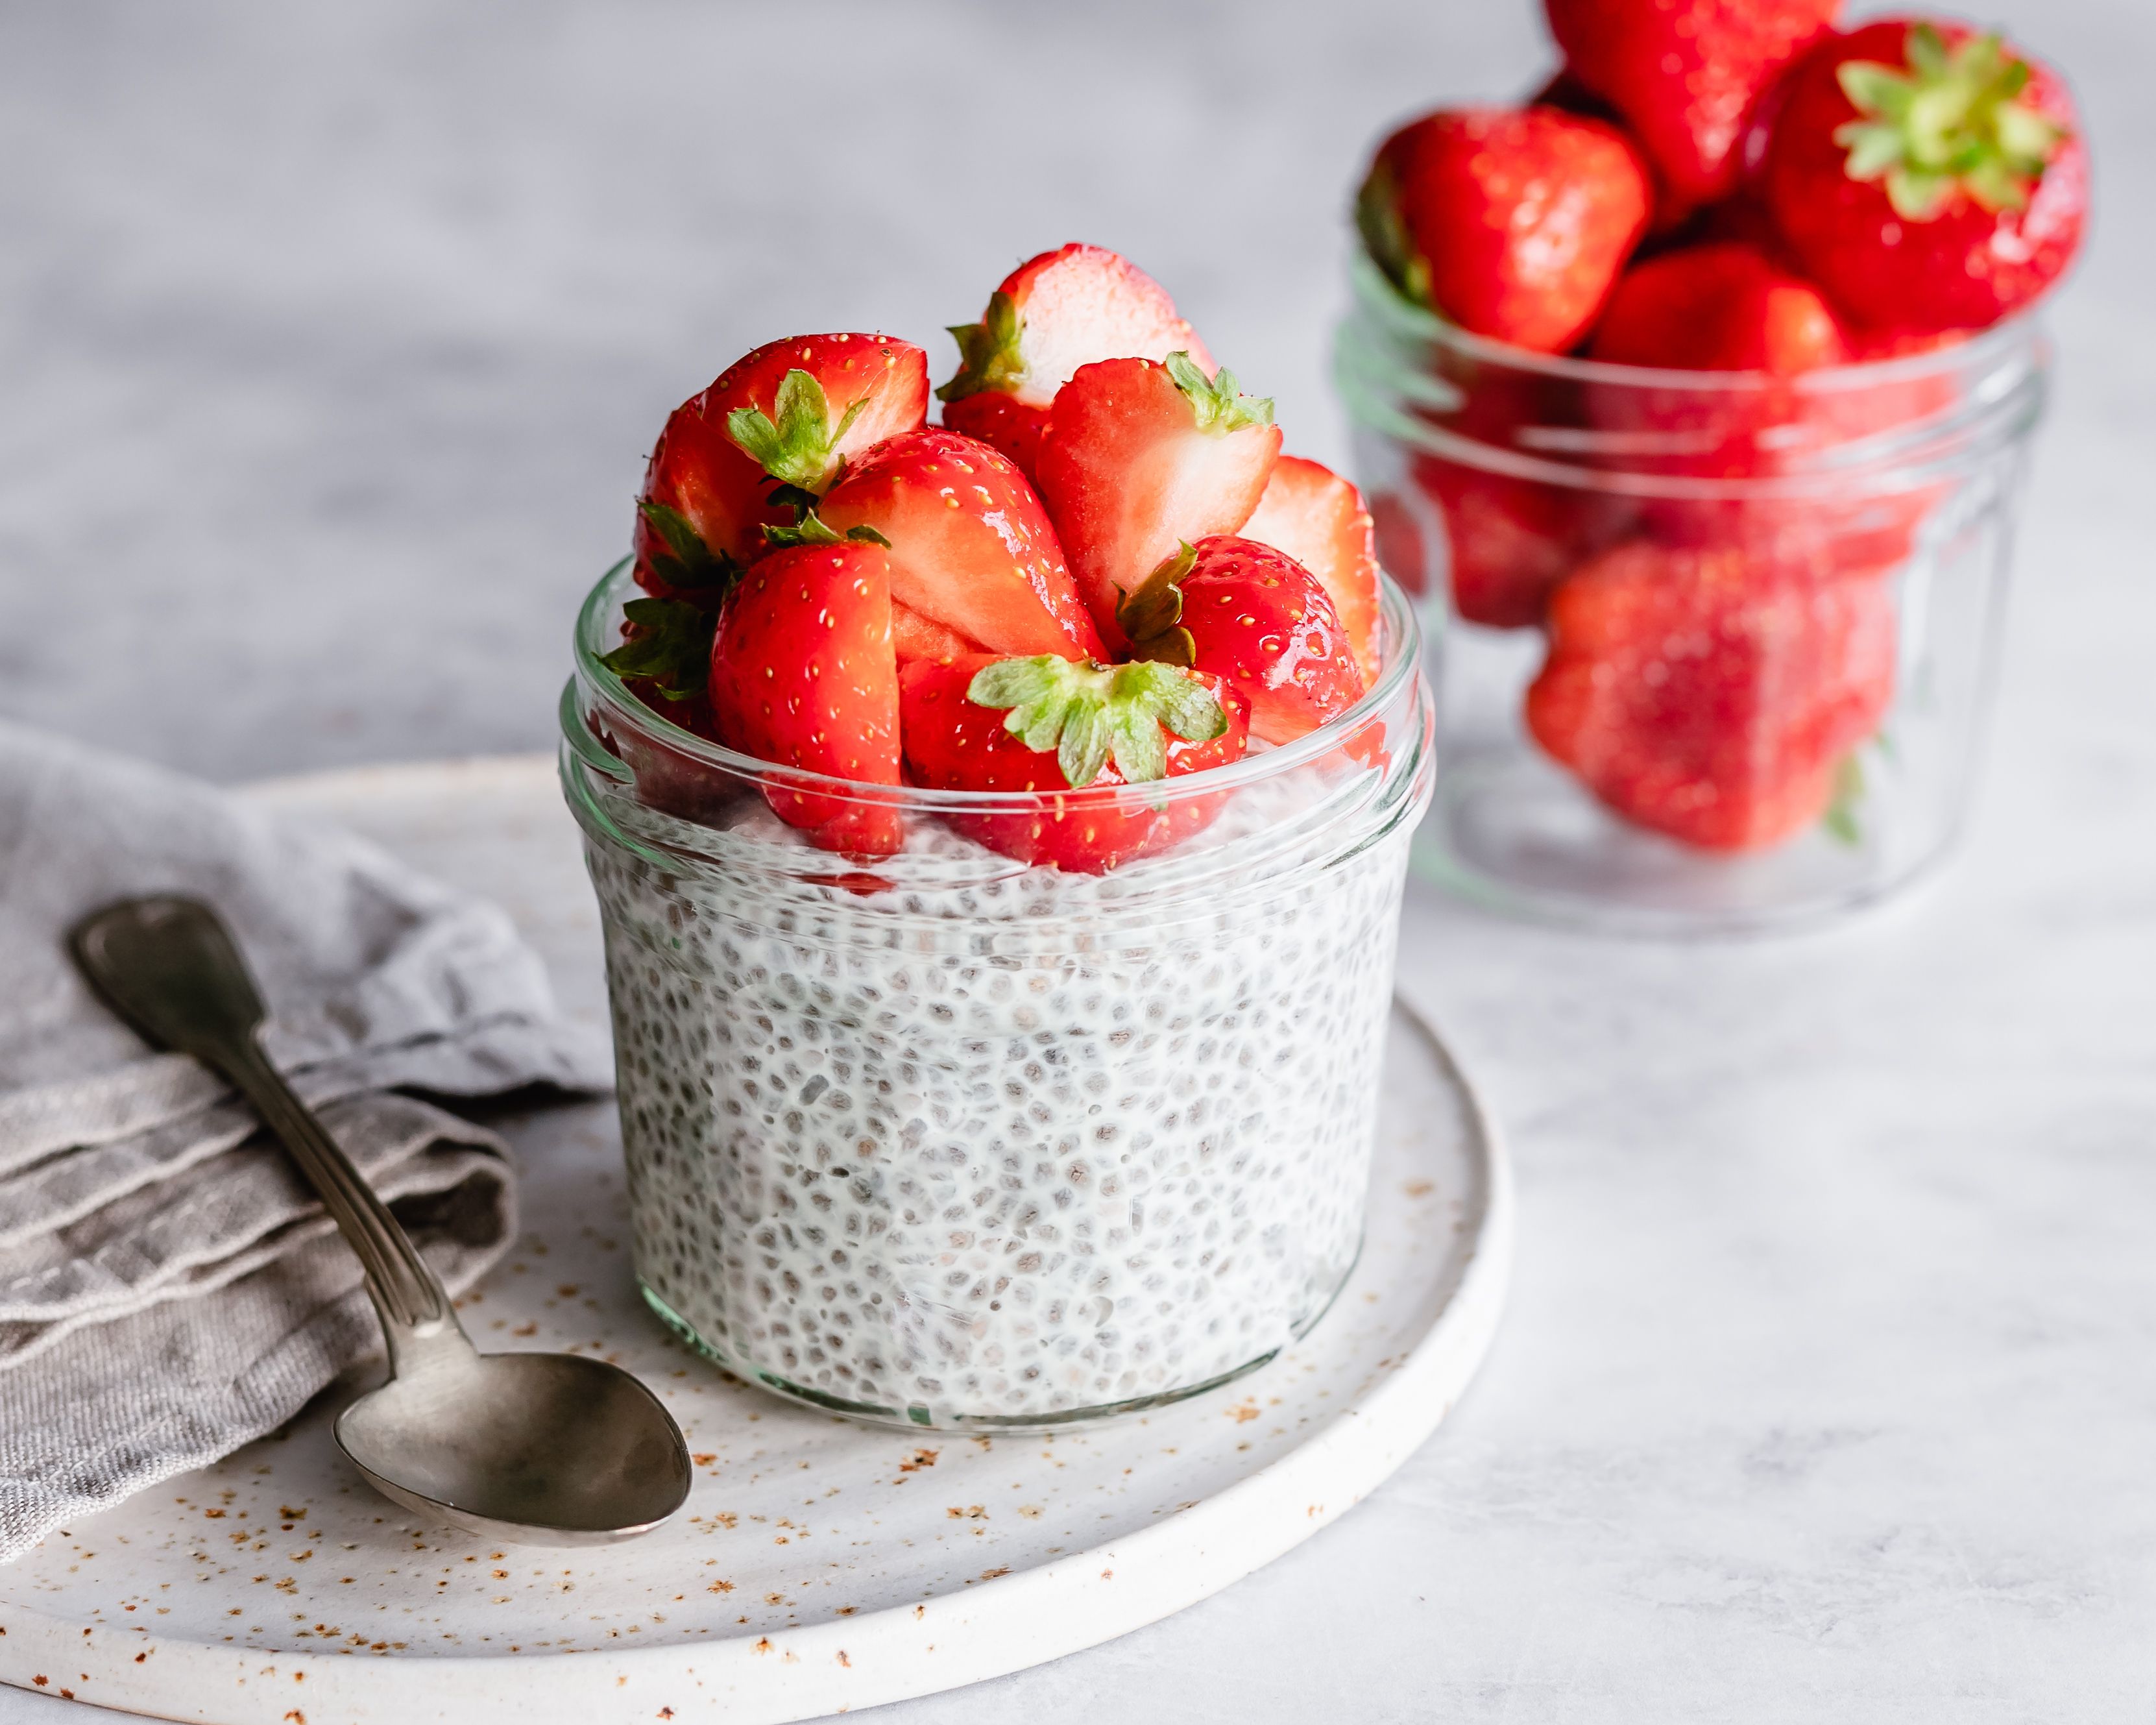 Chia Seeds Health Benefits, Recipes, & More at